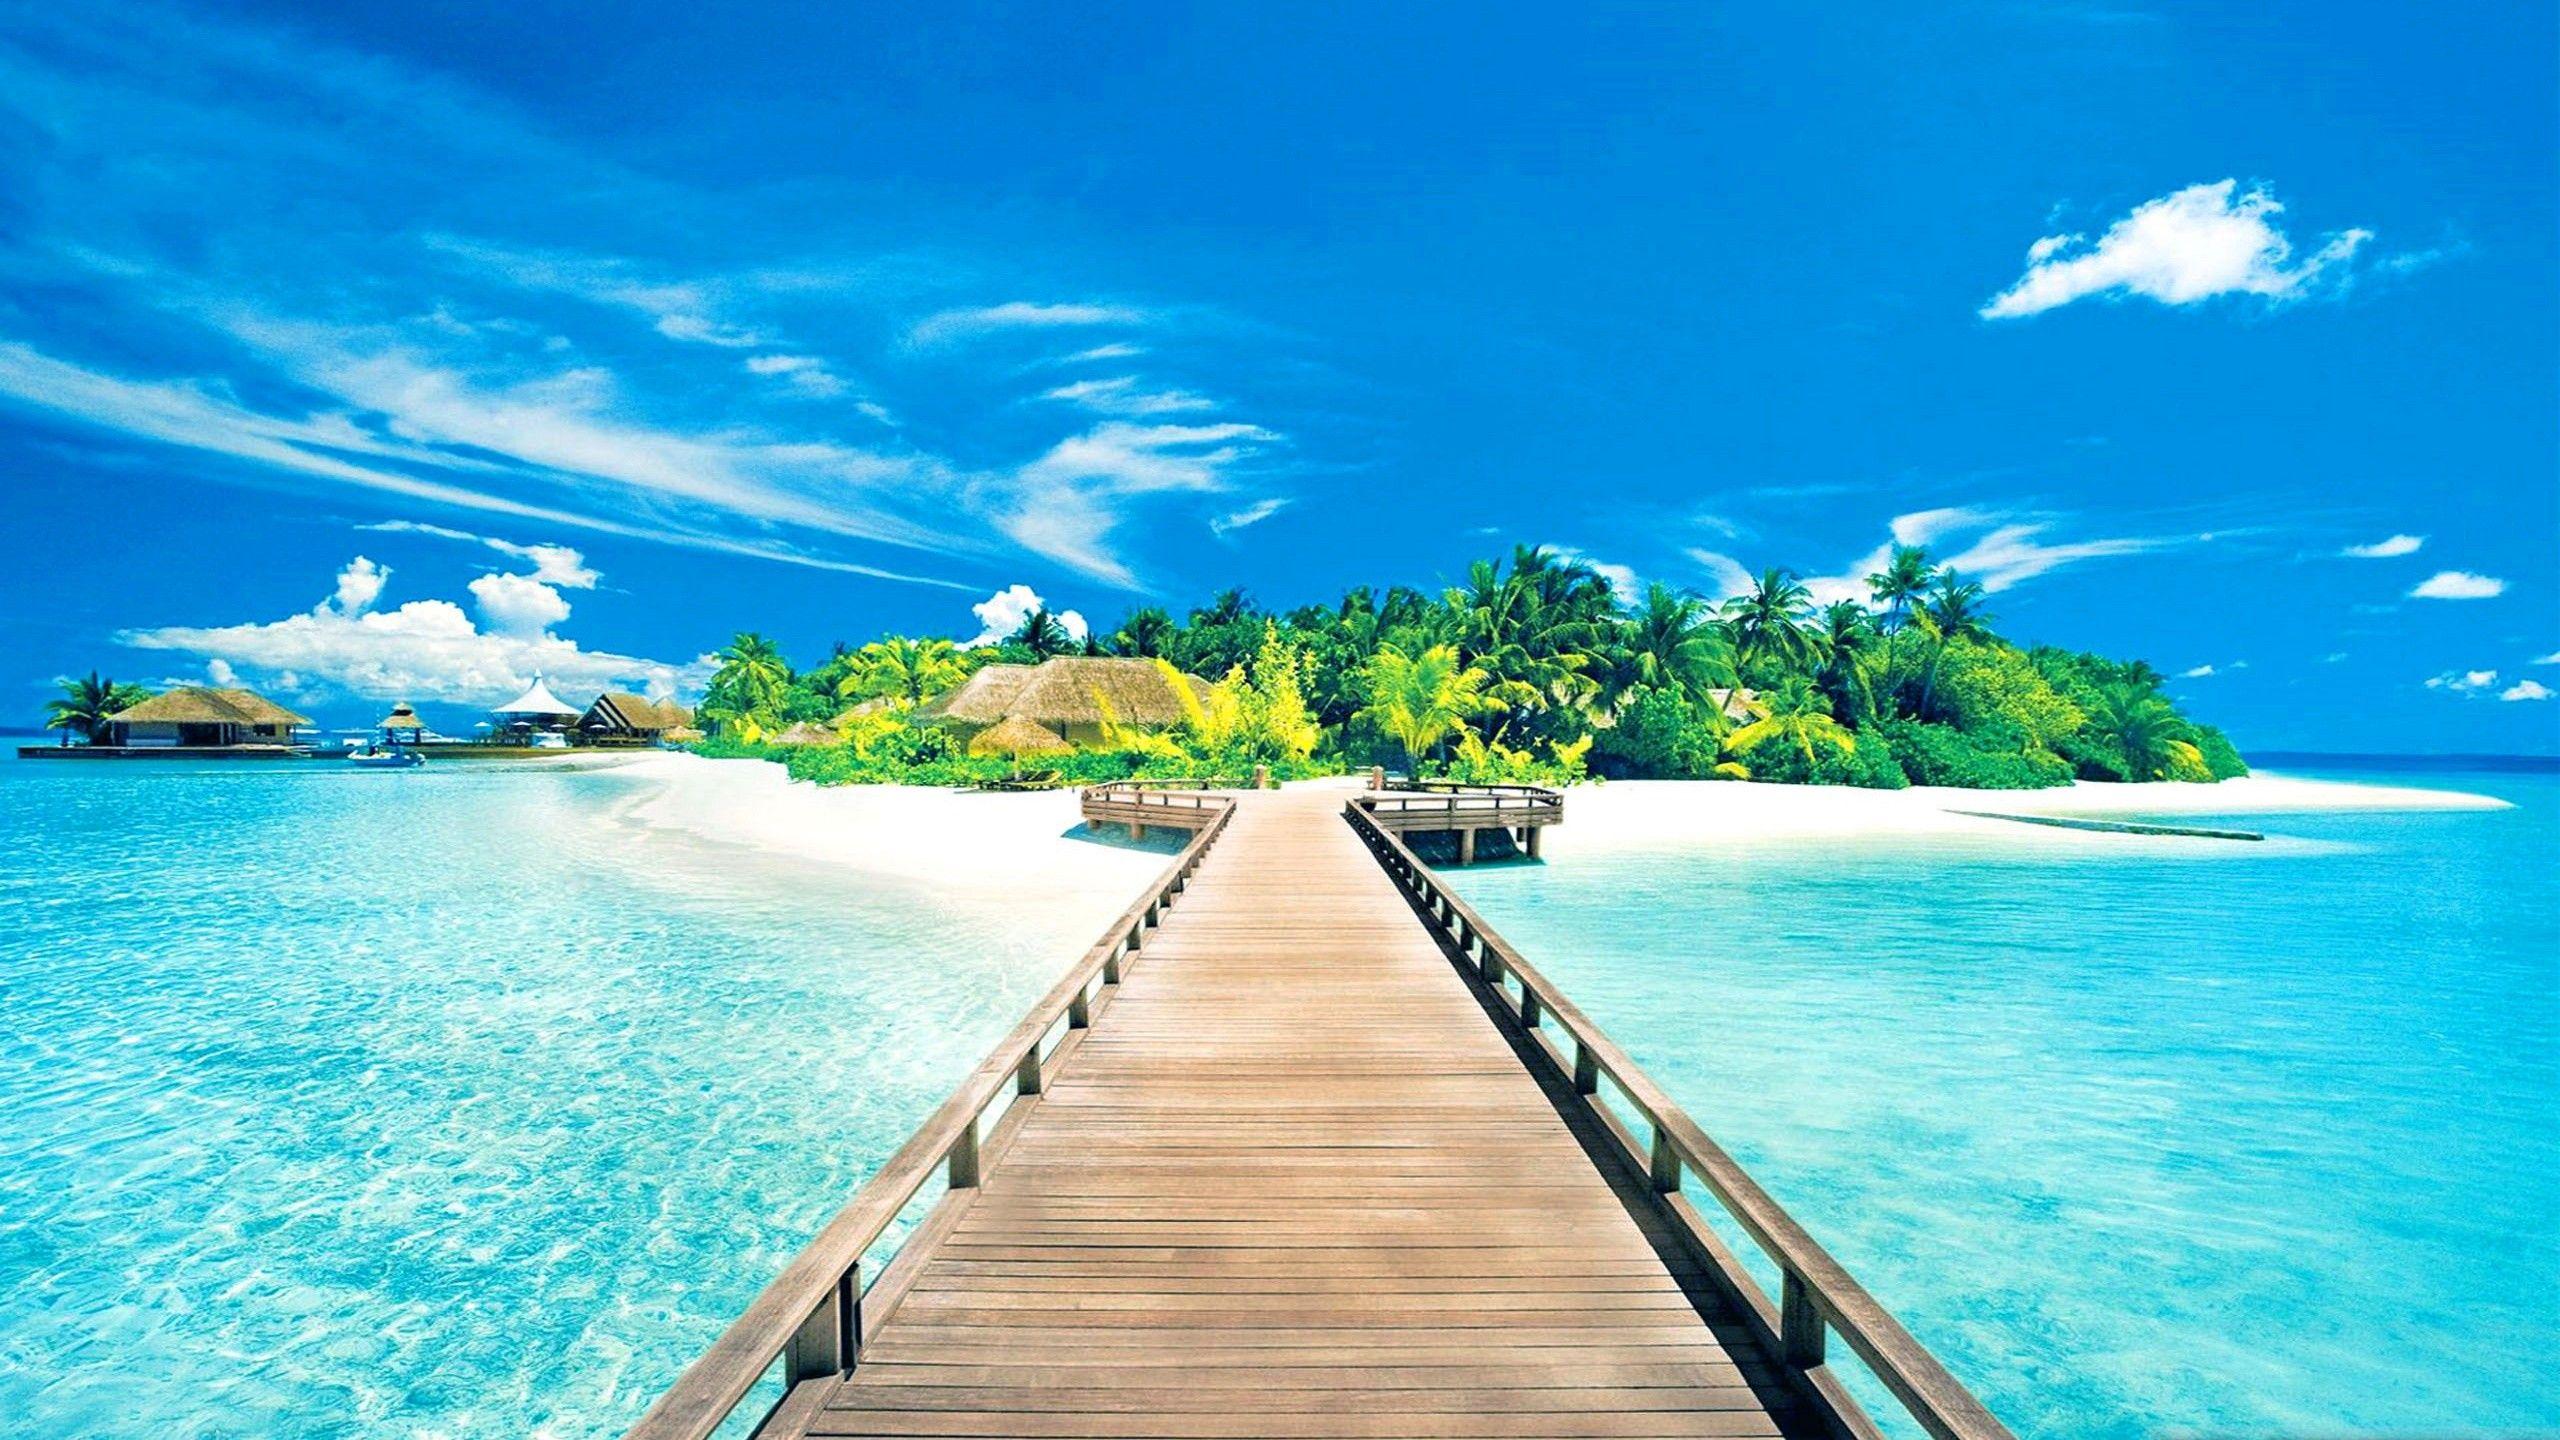 Tropical Background Image